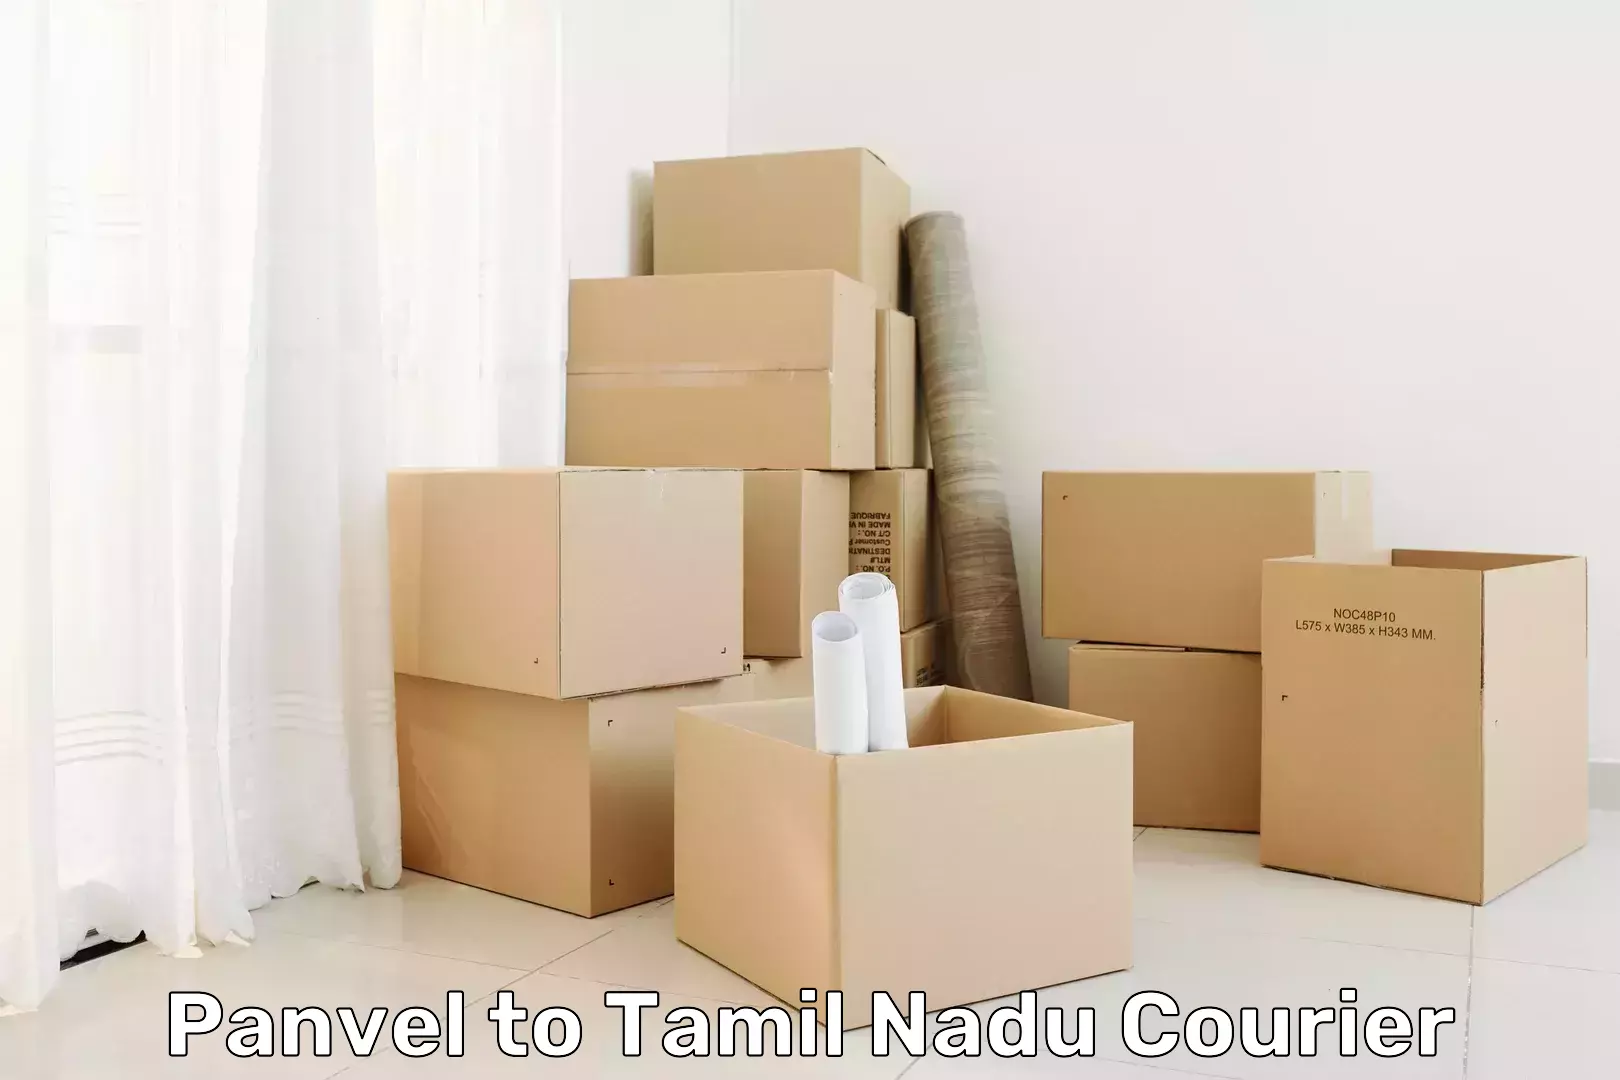 Flexible delivery schedules Panvel to Tamil Nadu